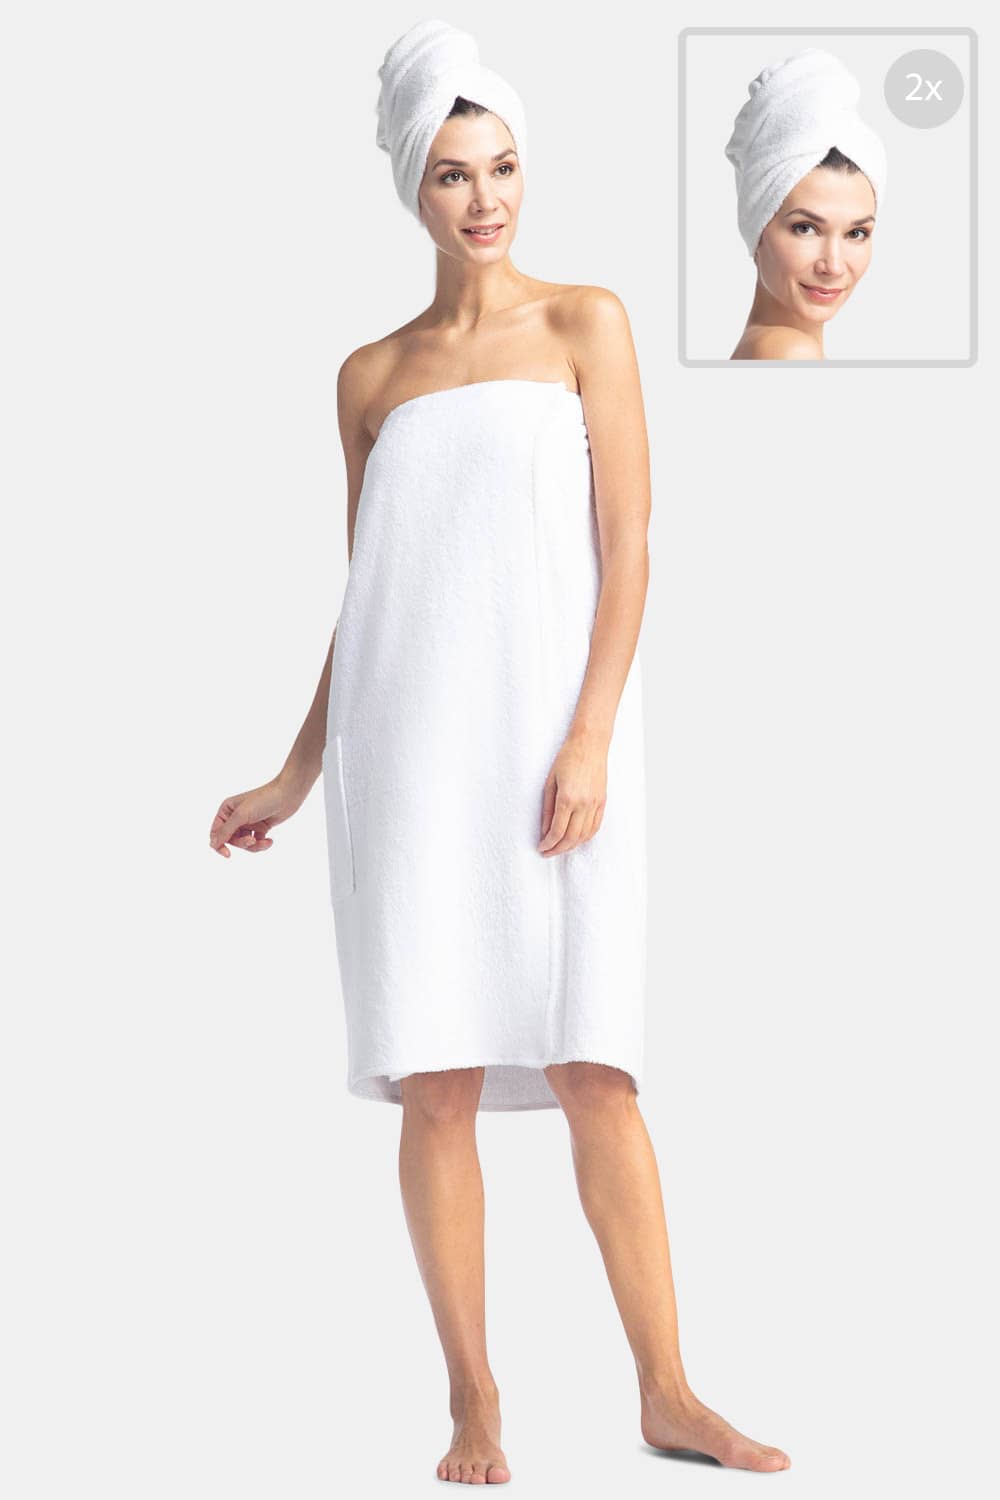 Women's Terry Cloth Spa Package - Body Wrap and Hair Towel Womens>Spa>Set Fishers Finery One-Size White 2